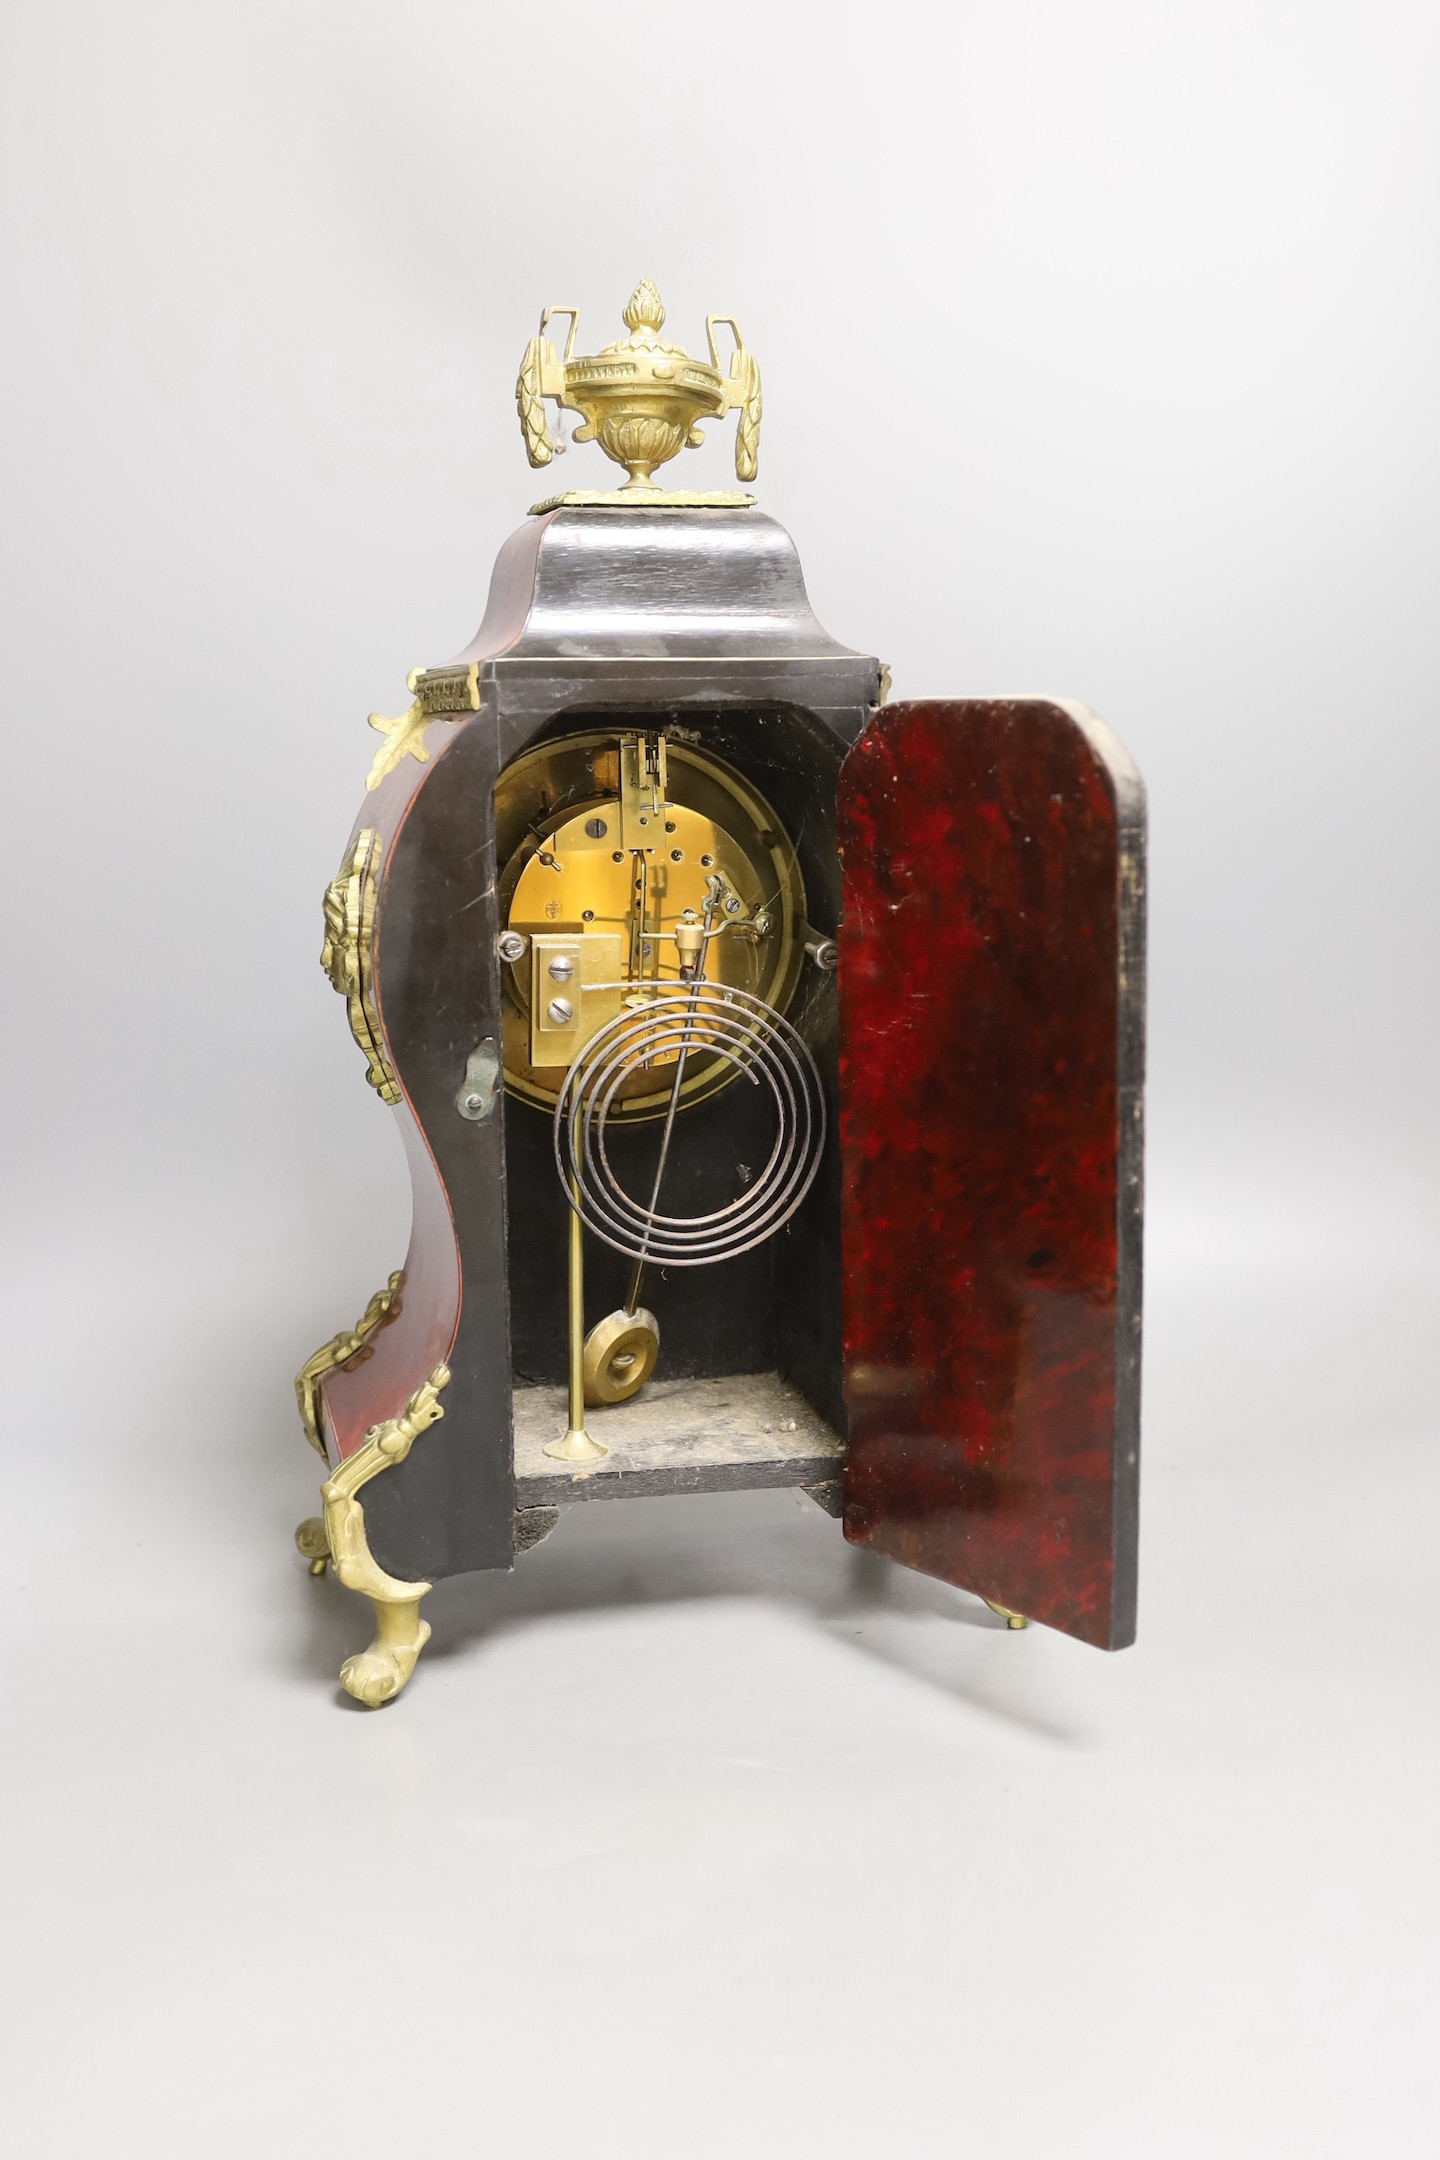 A late 19th century French scarlet tortoiseshell and ormolu mounted mantel clock - 40cm tall